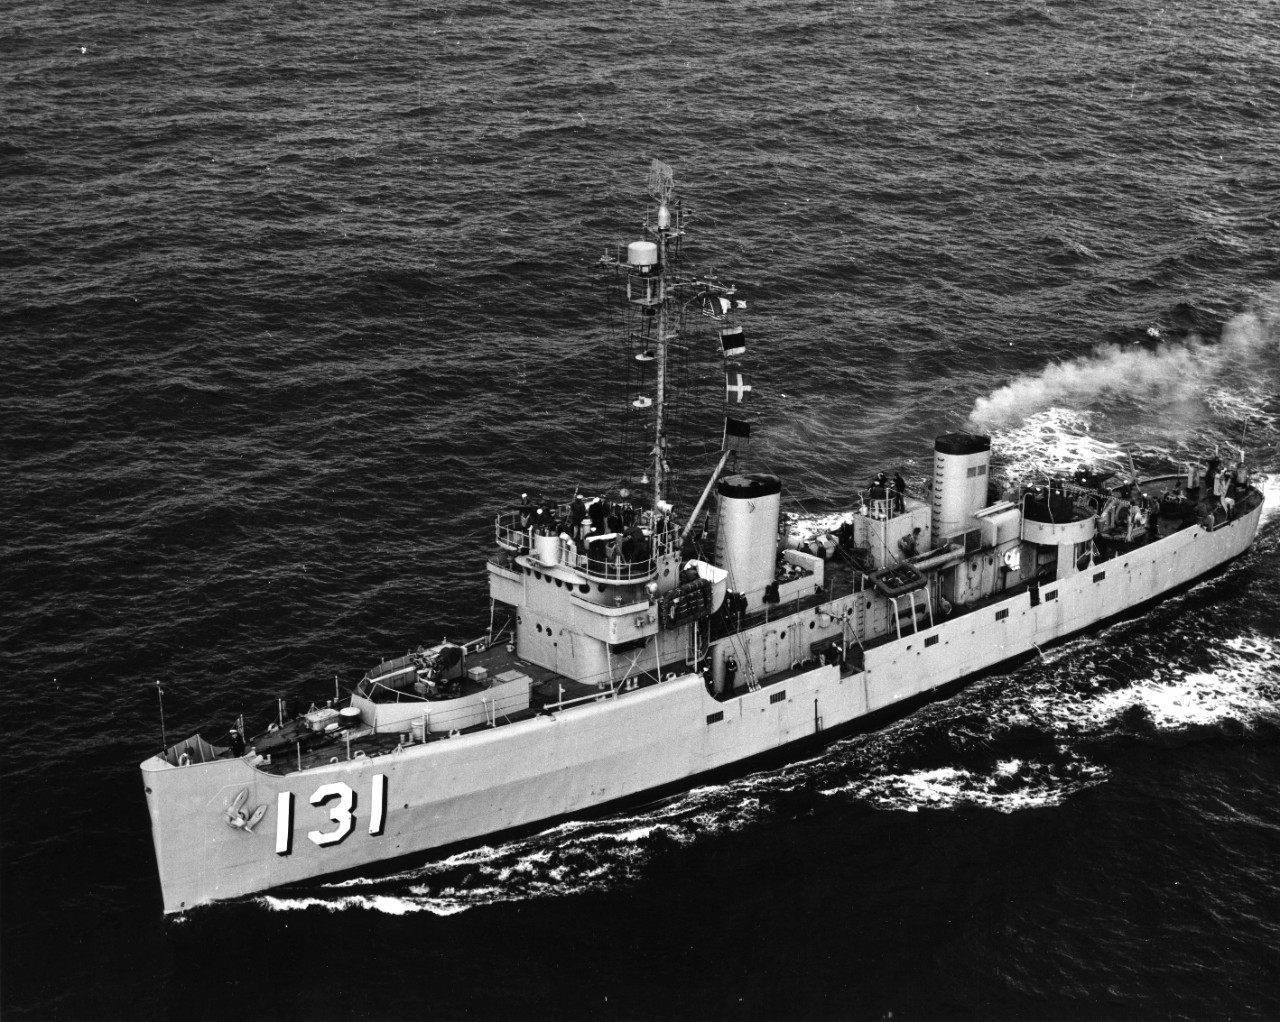 Port quarter aerial view of minesweeper USS Zeal (AM-131) underway, circa early 1950s